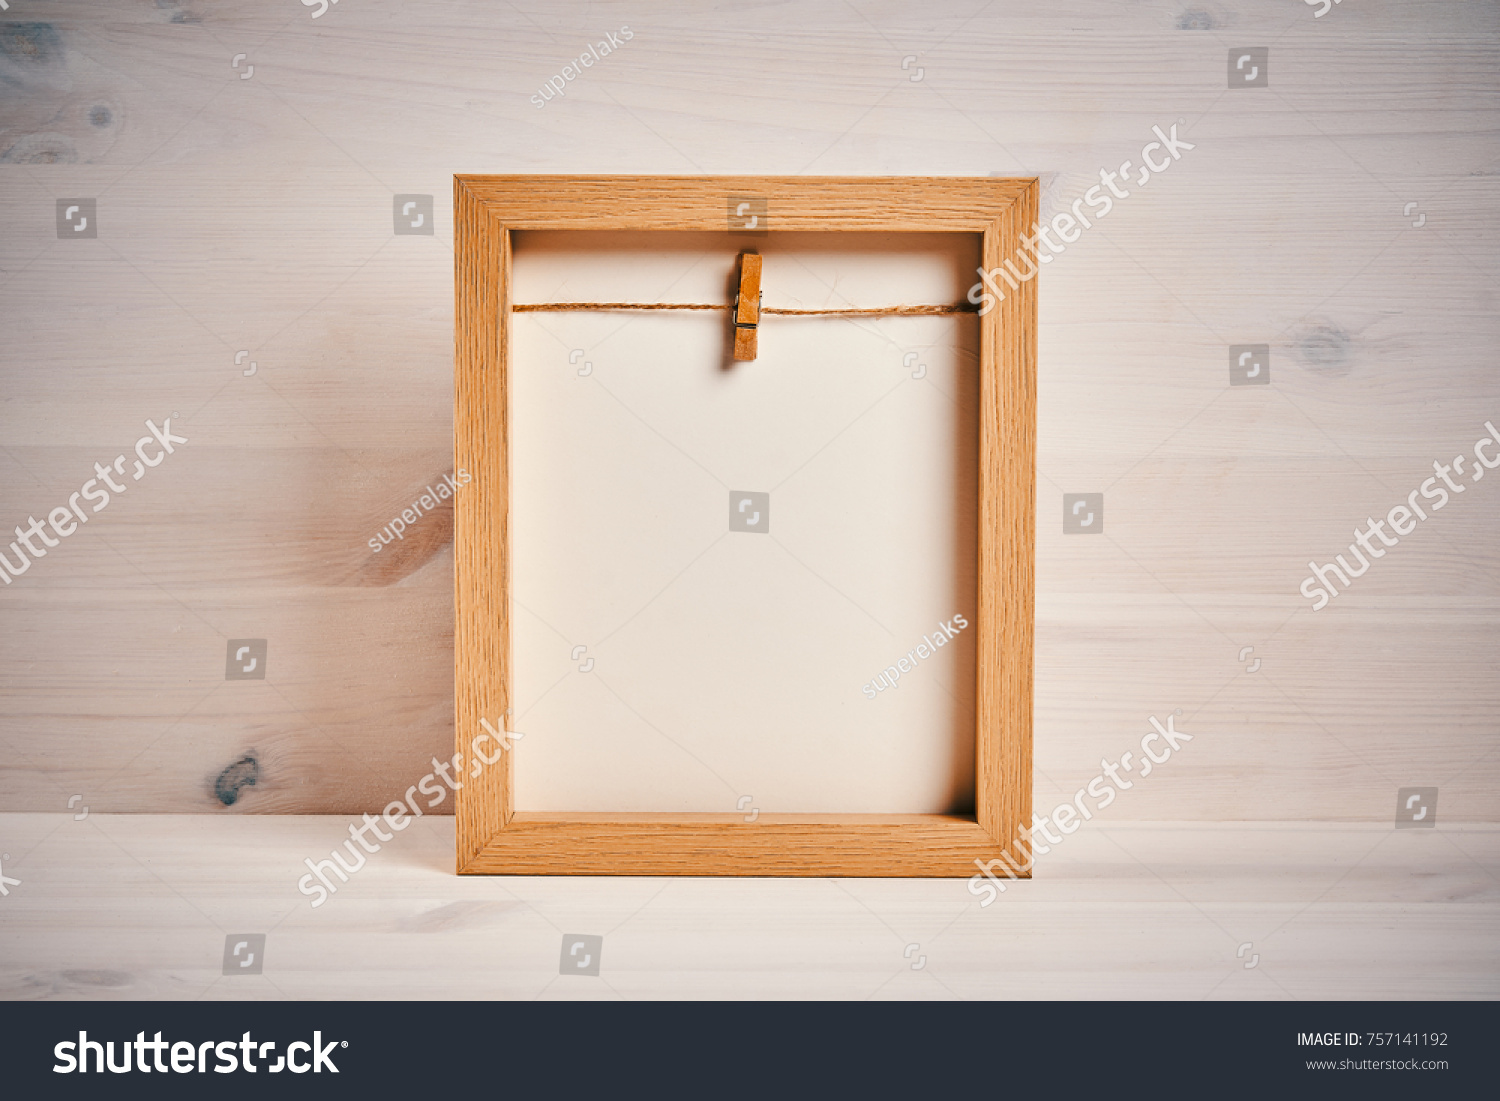 Old empty frame on a shelf on a wooden background #757141192